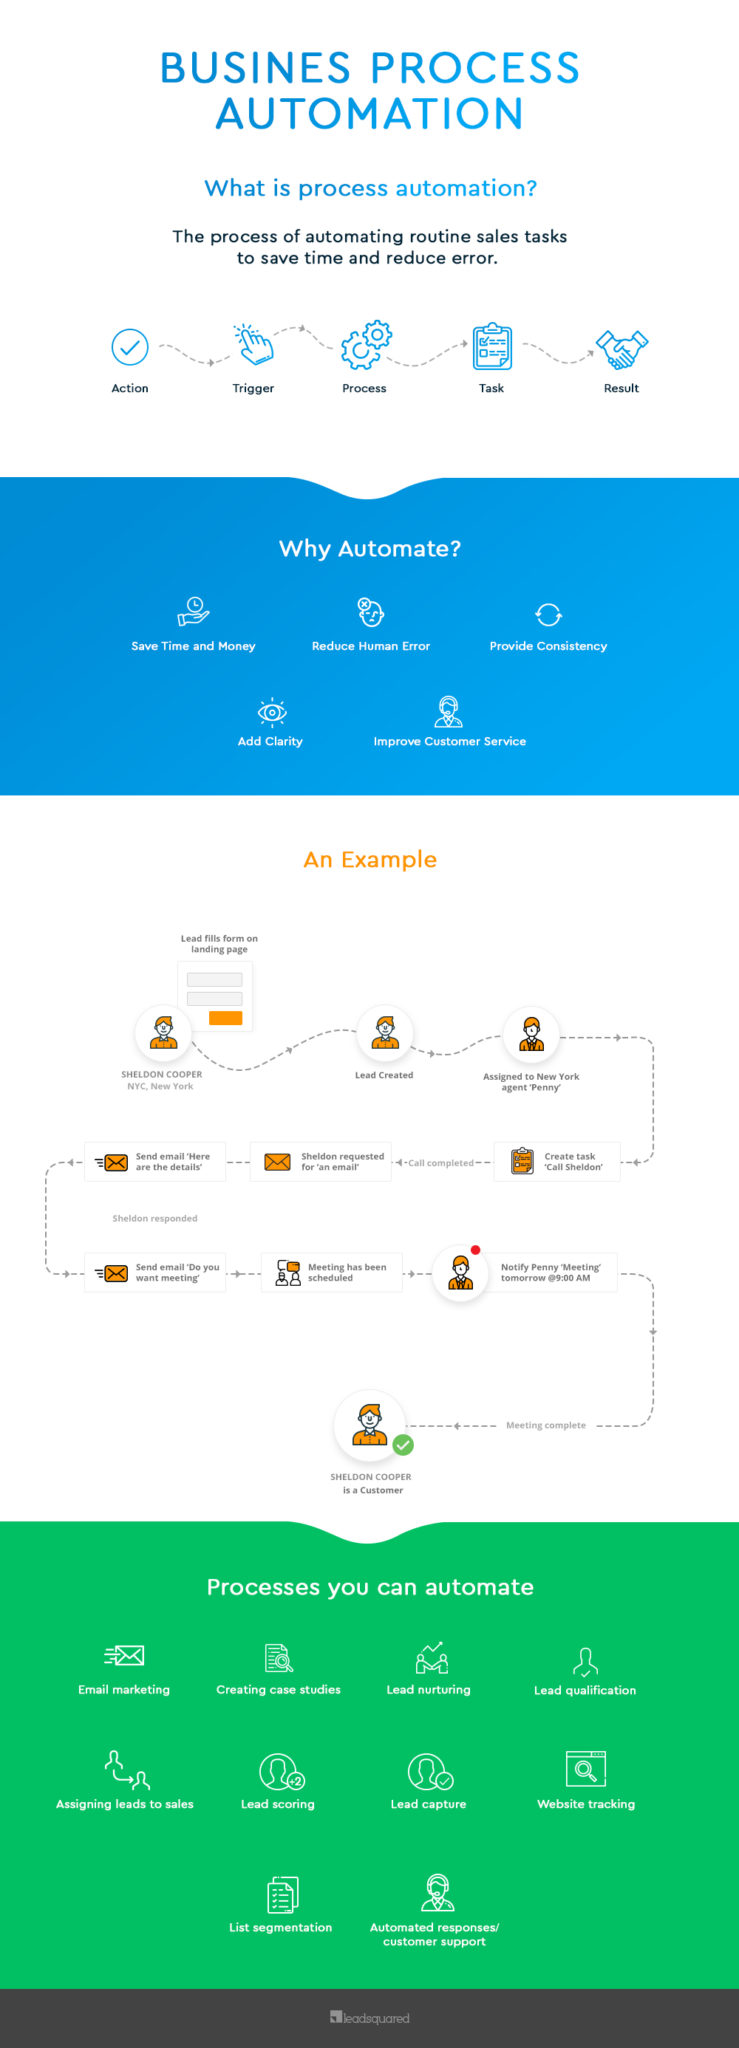 Business process automation - infographic